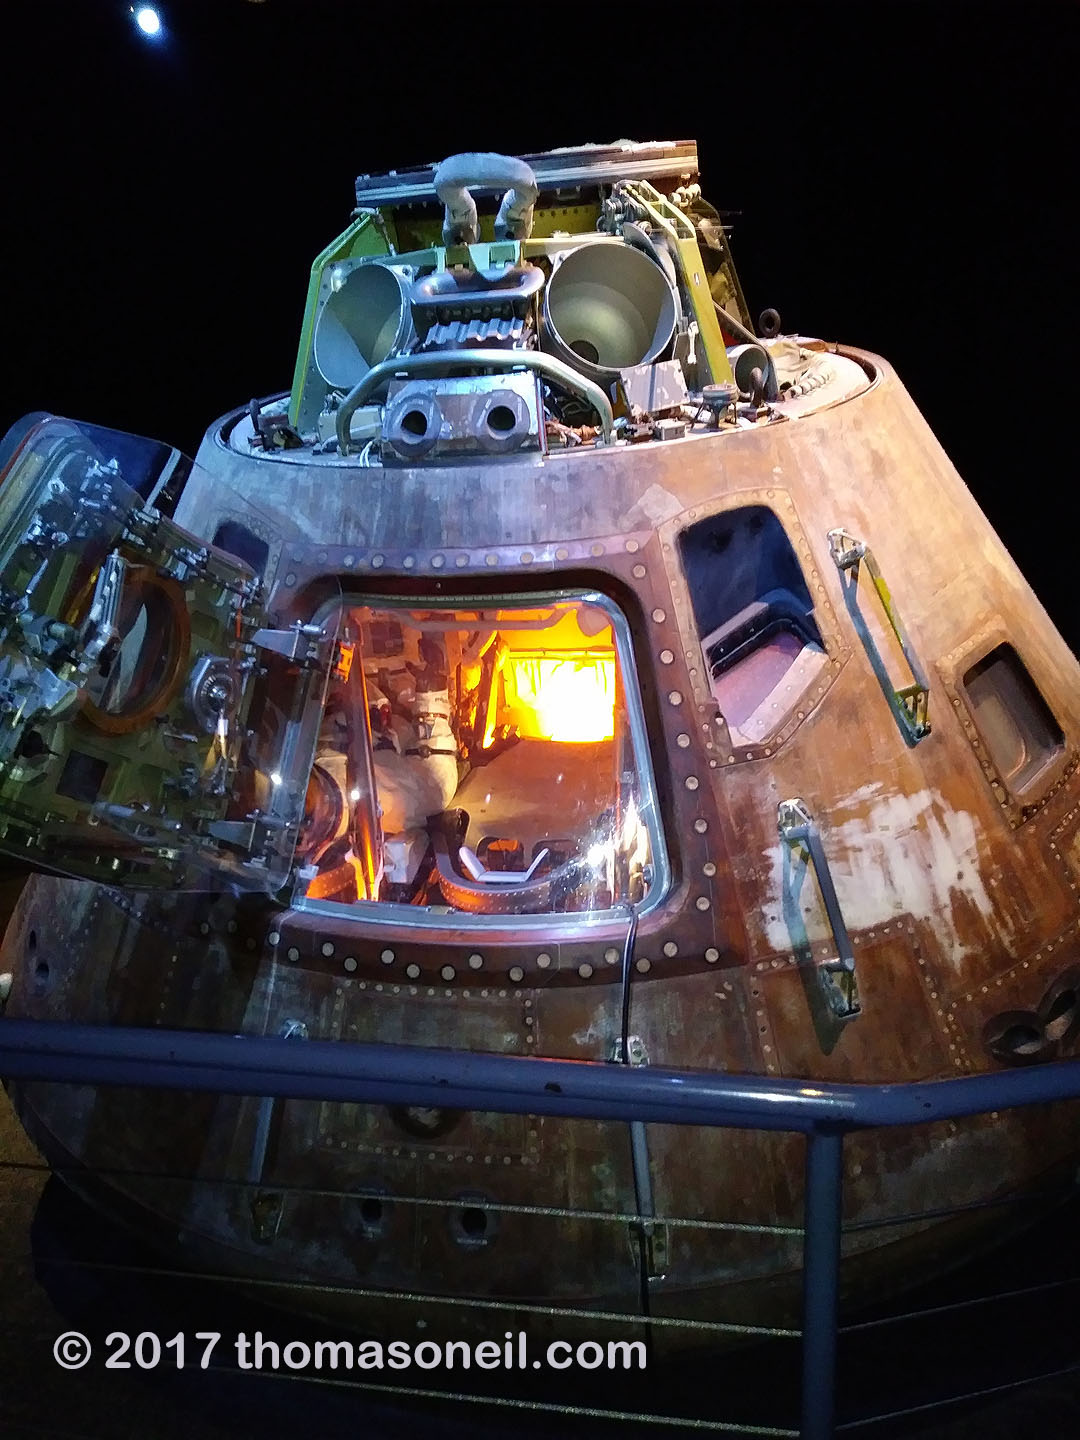 Apollo 17 command module America piloted by Ronald Evans, Johnson Space Center, Houston, July 2017.  Apollo 17 was the last moon mission in 1972, making Harrison Schmitt and Gene Cernan the last men on the moon.  I thought we would be on Mars by the turn of the century, but American leaders had more mundane ambitions after Apollo.  Click for next photo.